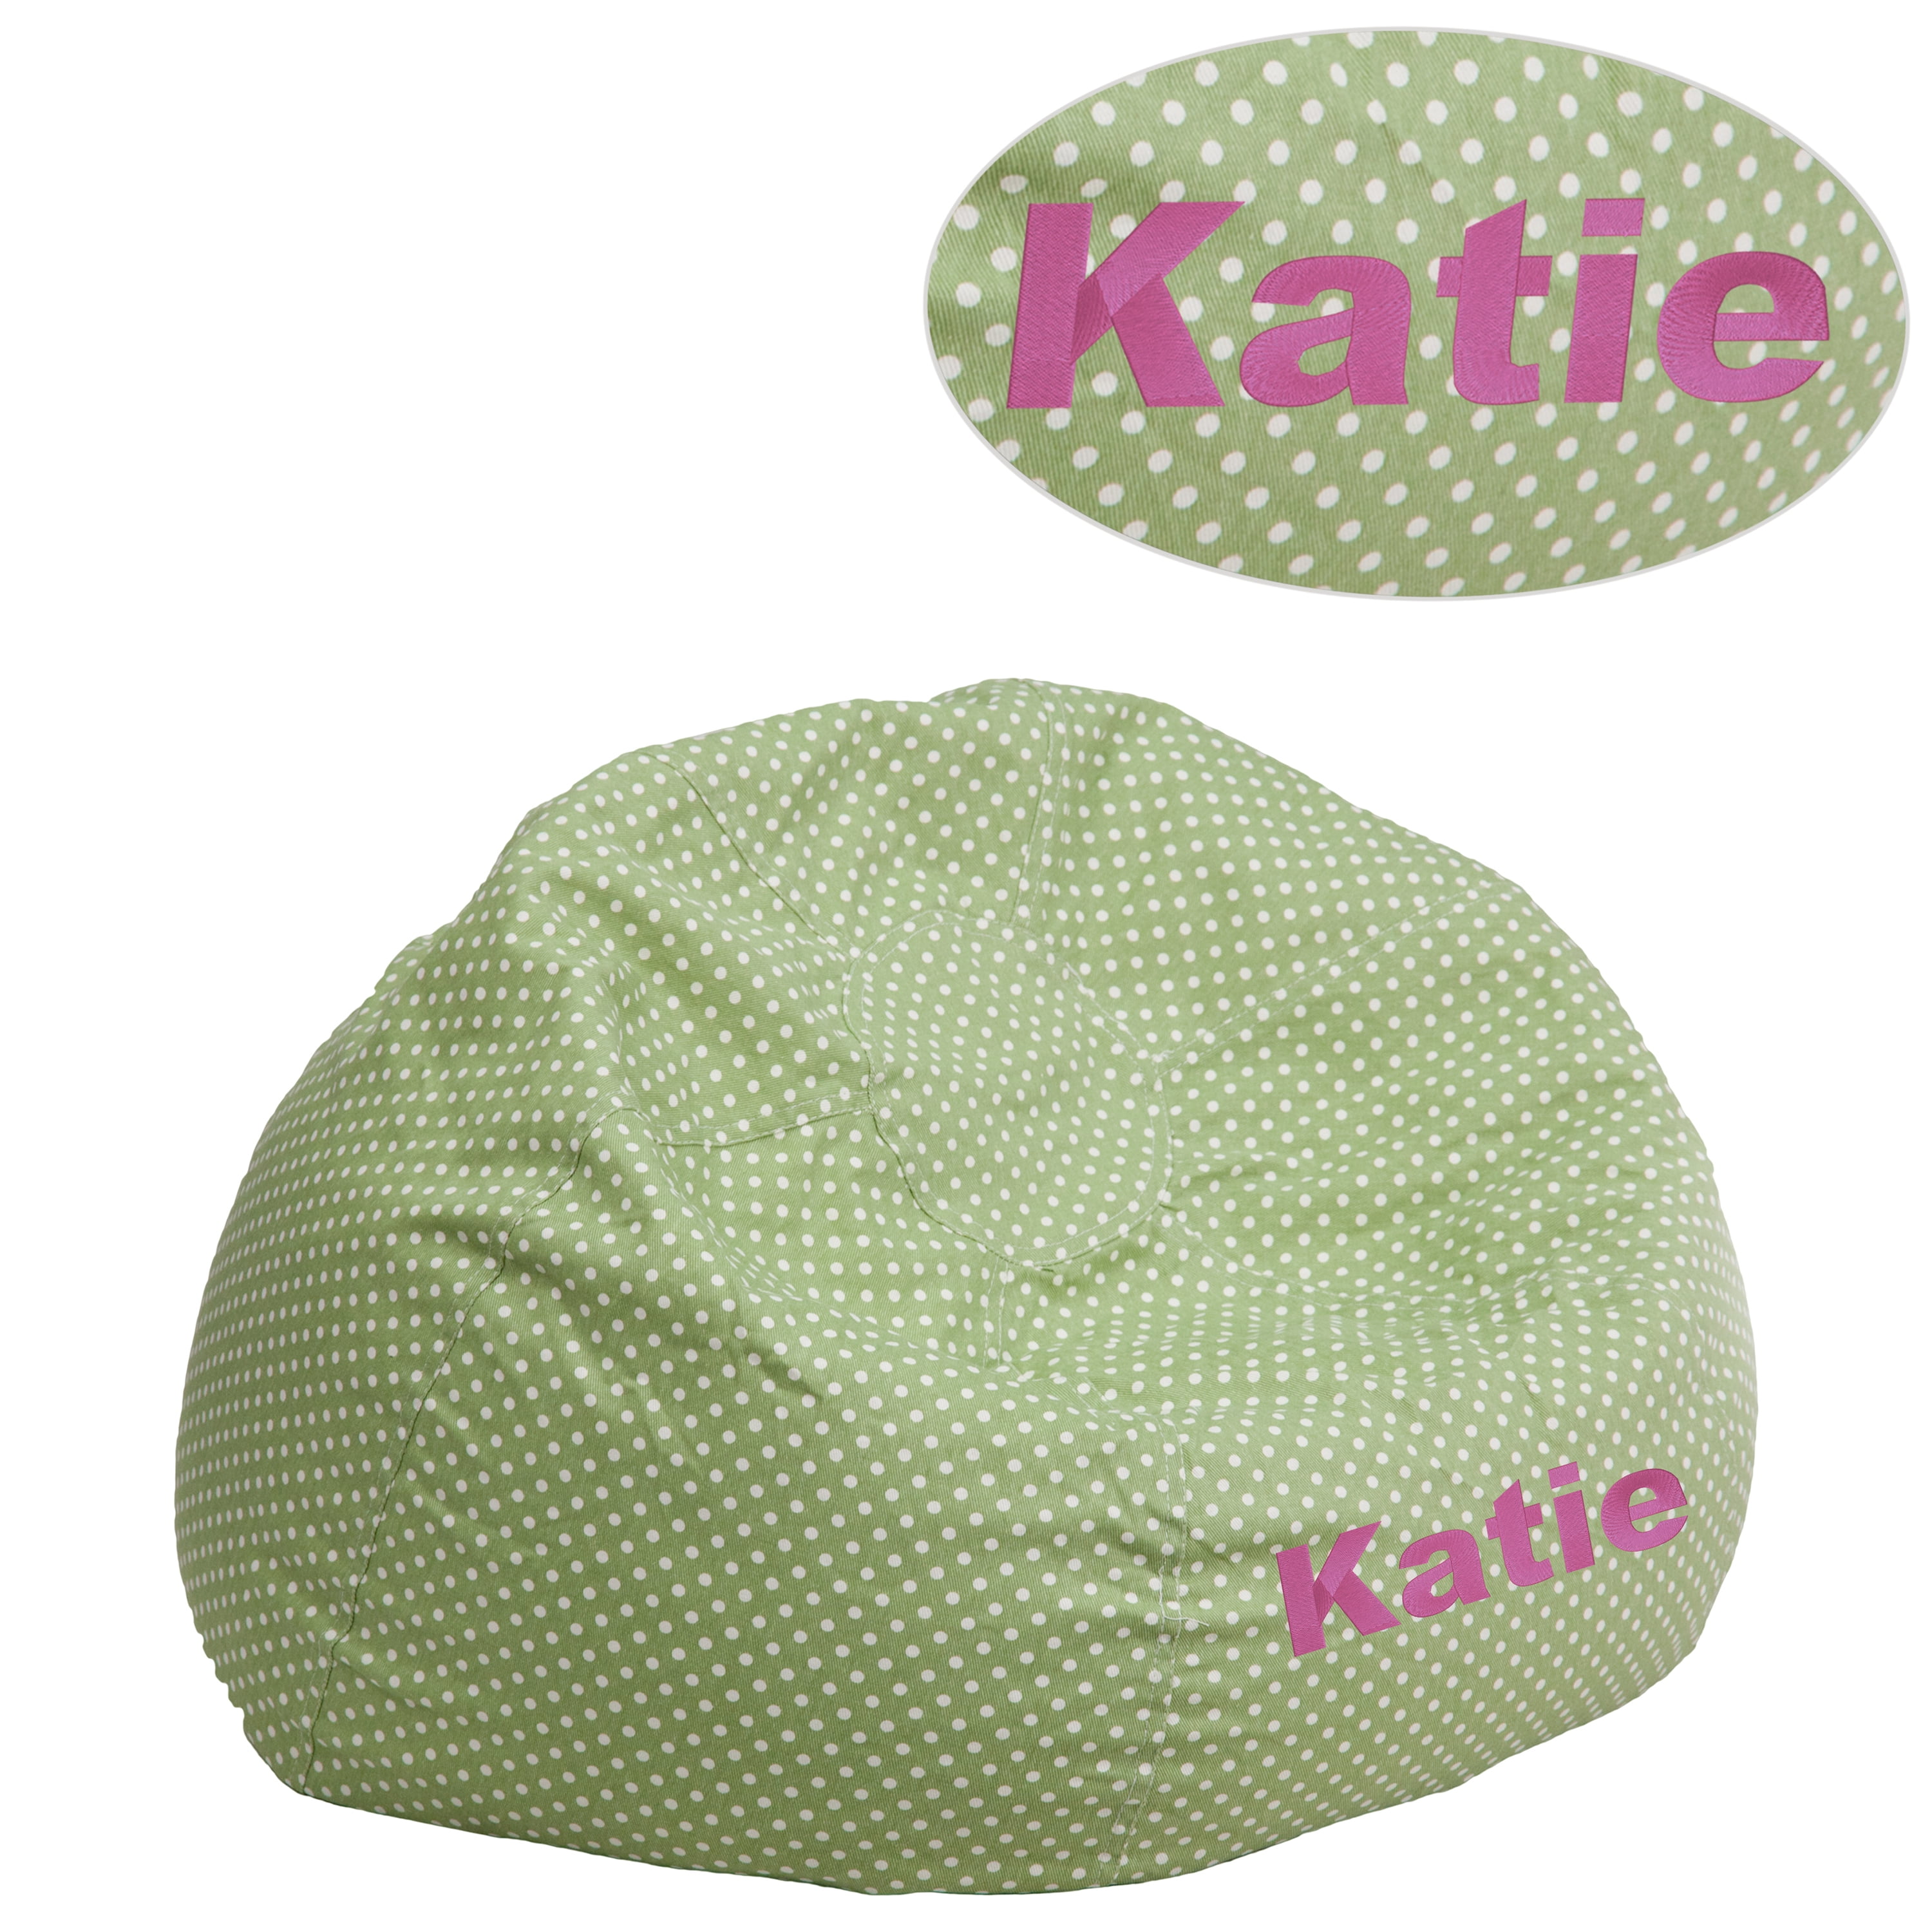 child bean bag chair personalized